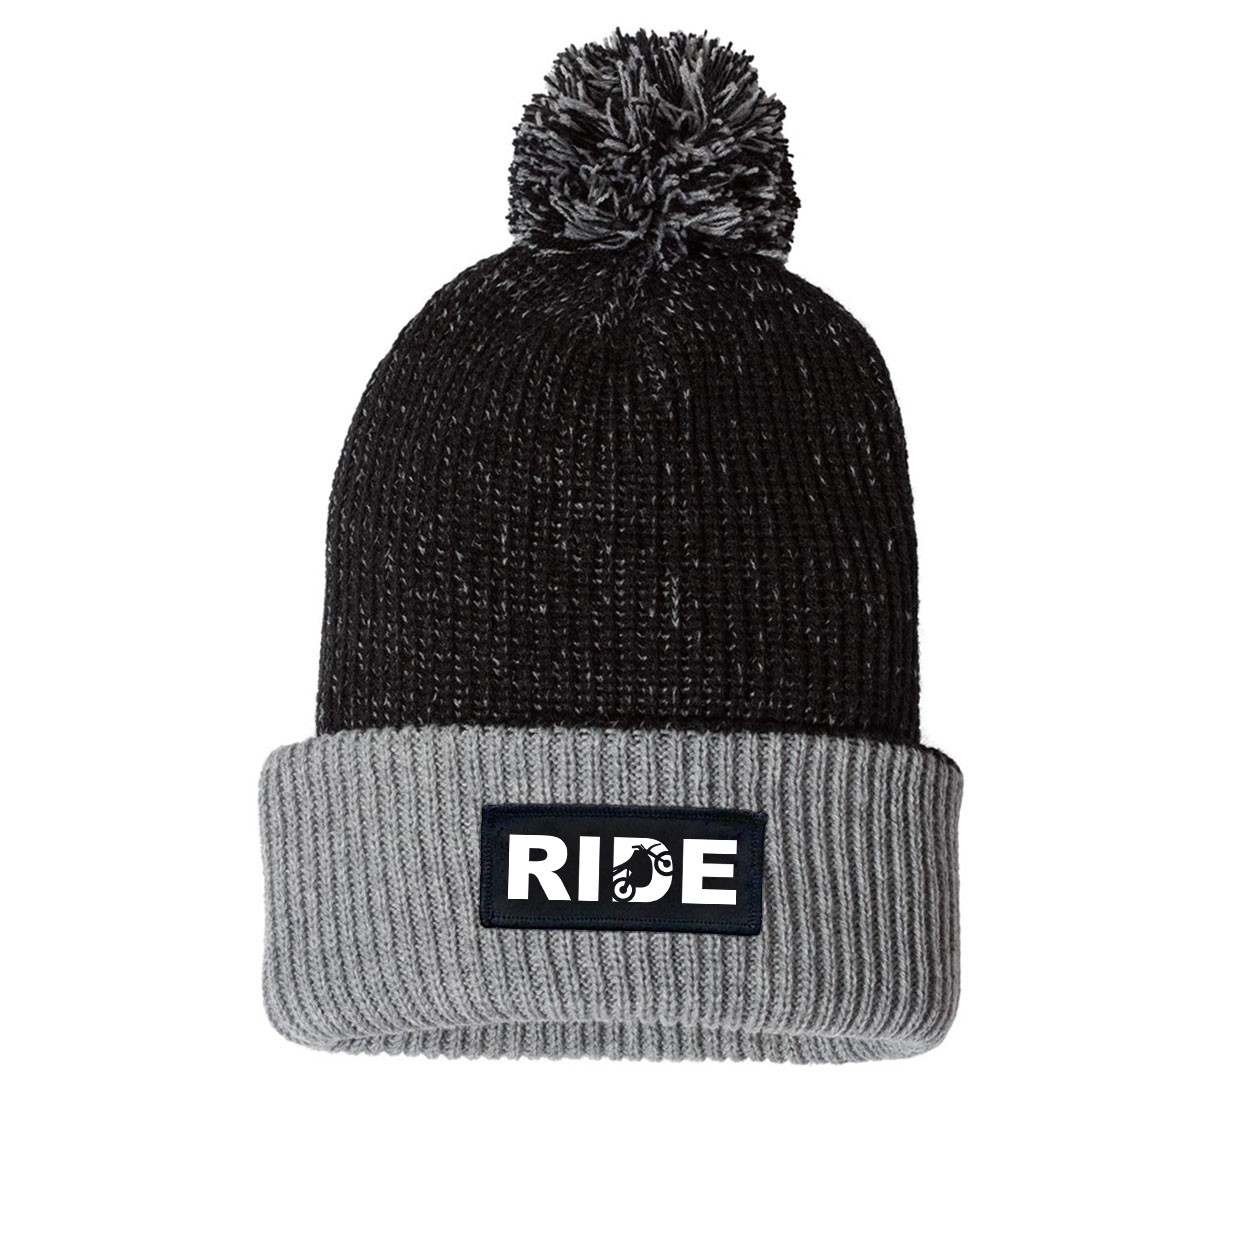 Ride Moto Logo Night Out Woven Patch Roll Up Pom Knit Beanie Black/Gray (White Logo)